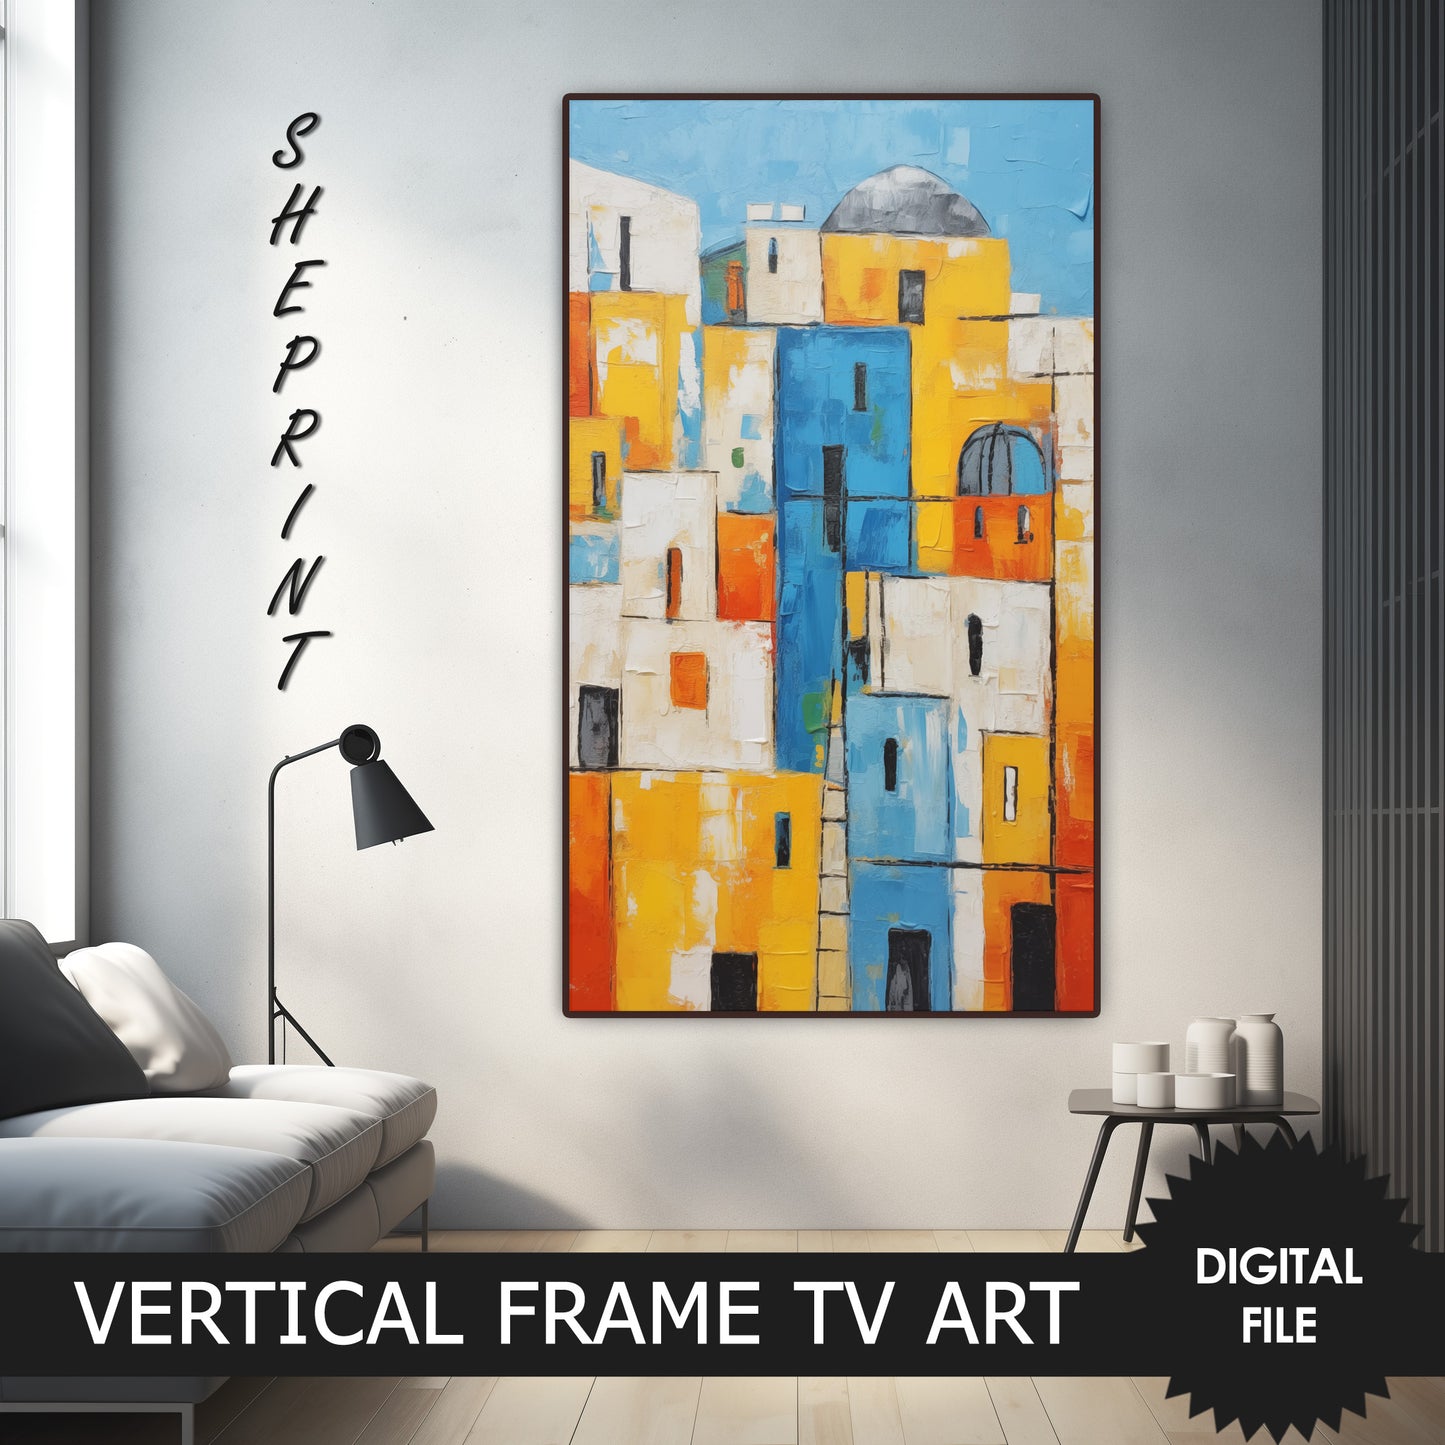 Vertical Frame TV Art, Coastal Town Art, Oil Painting preview on Samsung Frame TV when mounted vertically